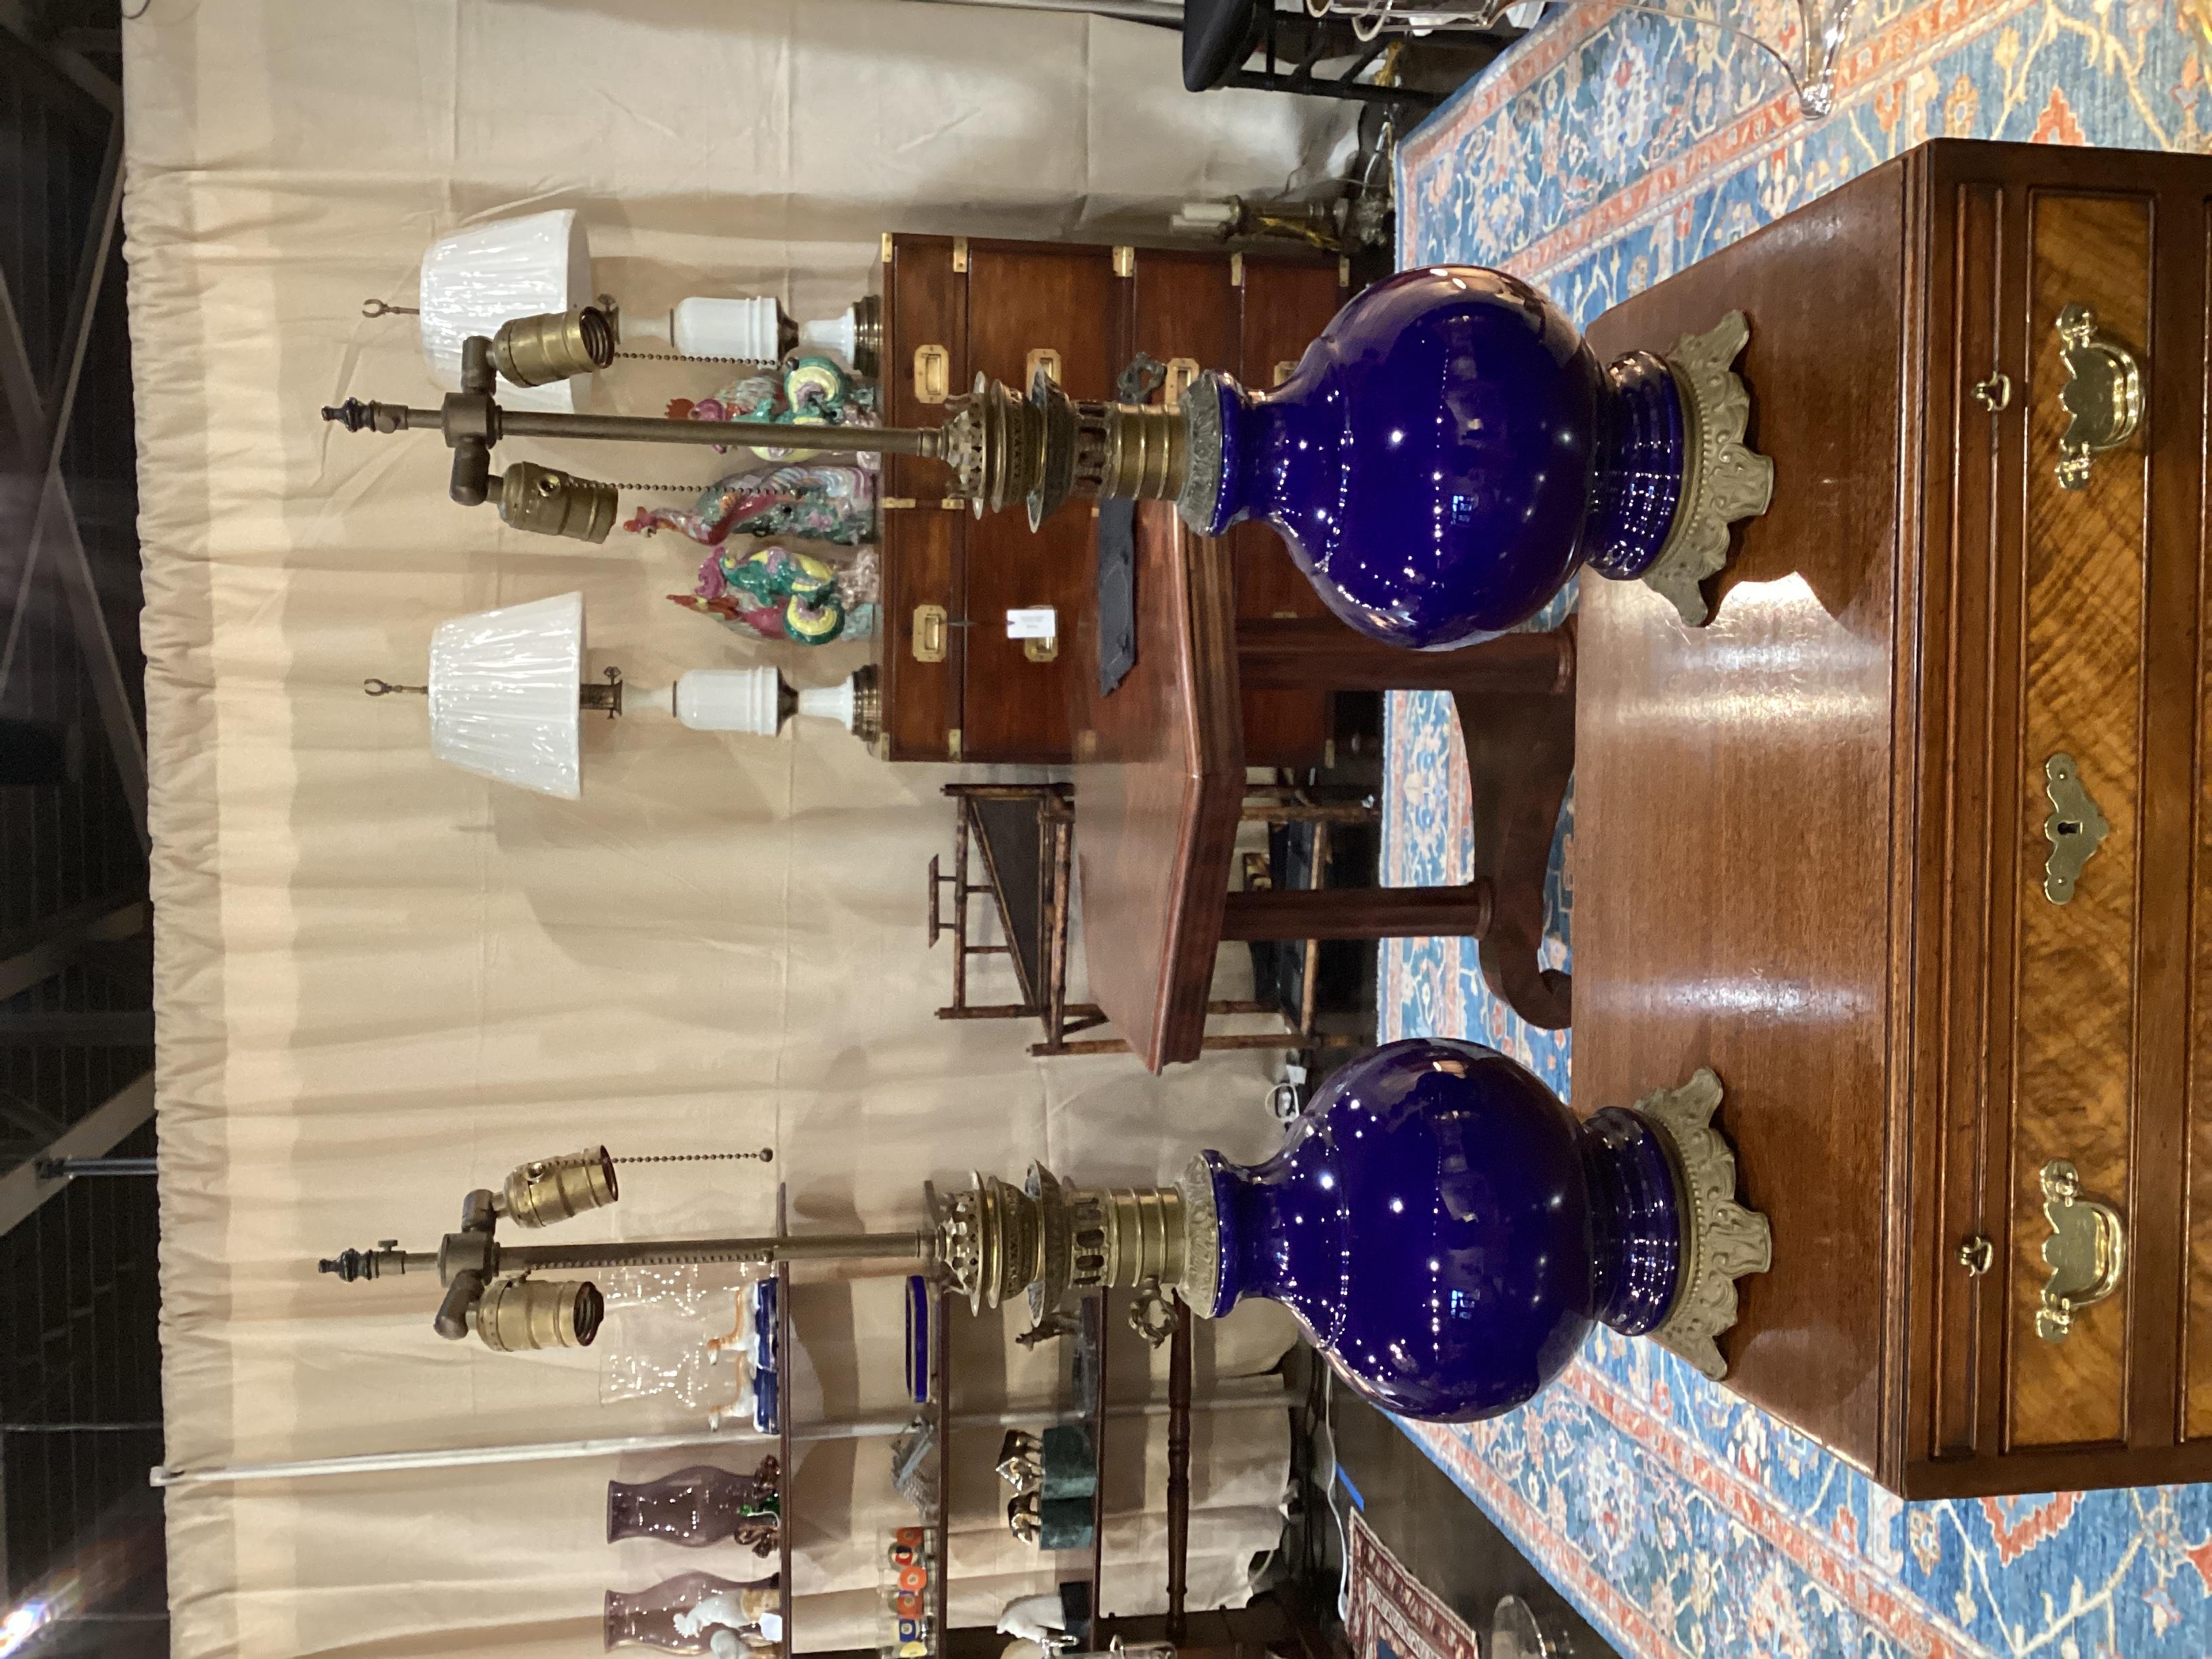 Pair of Antique French Cobalt Blue Ceramic Lamps. These were originally used as oil lamps and were later converted to electricity. Wired and in good working condition with double cluster lights.